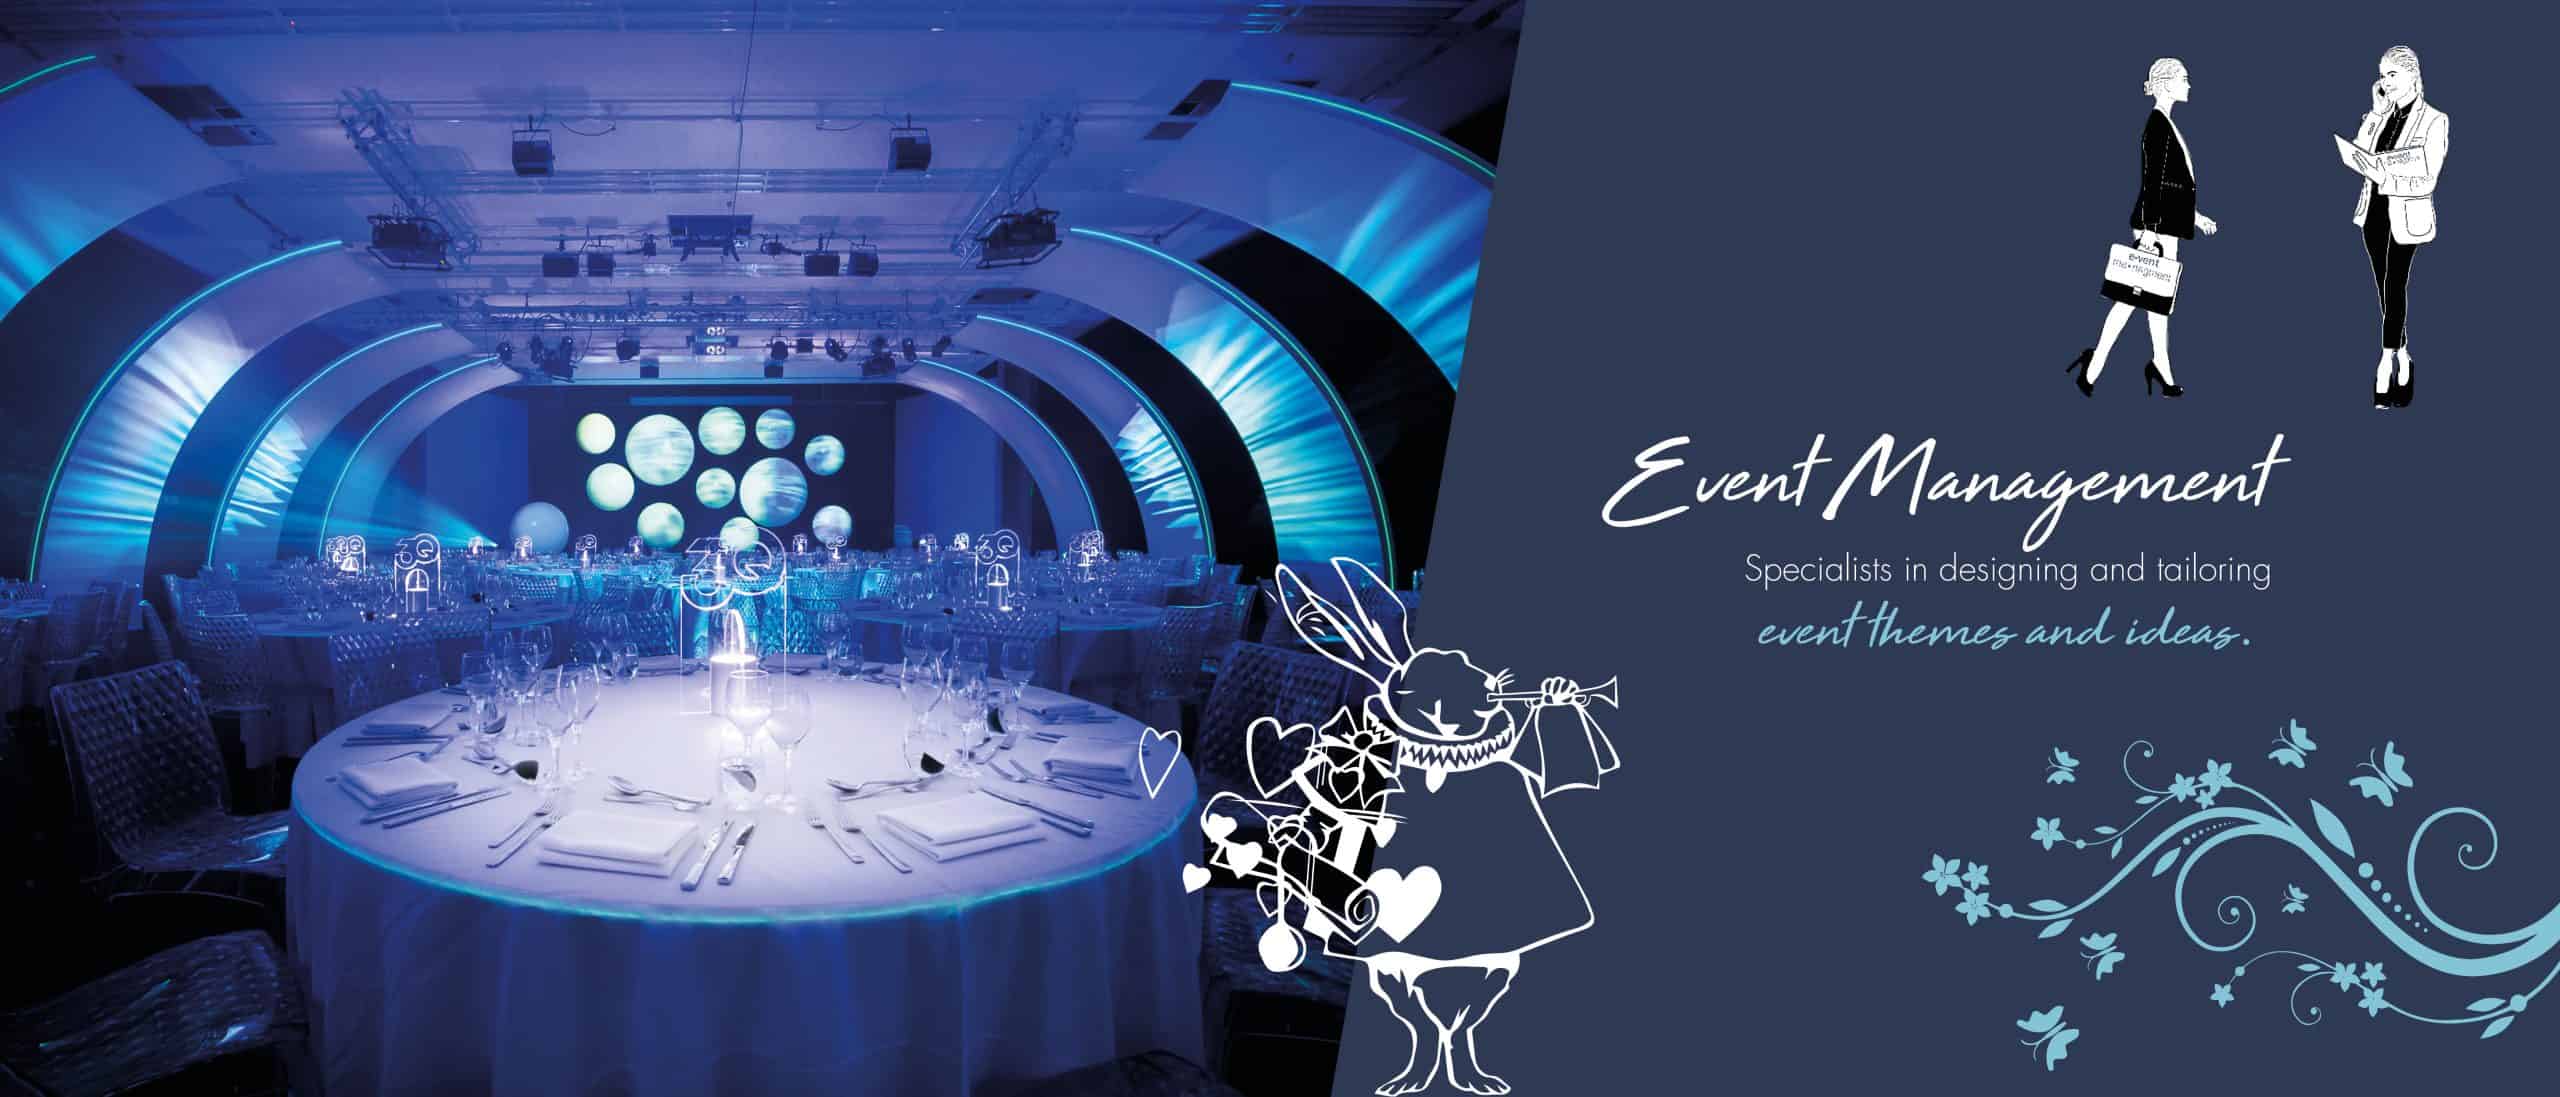 Event dinner room with round table and large lights, with Event Management text